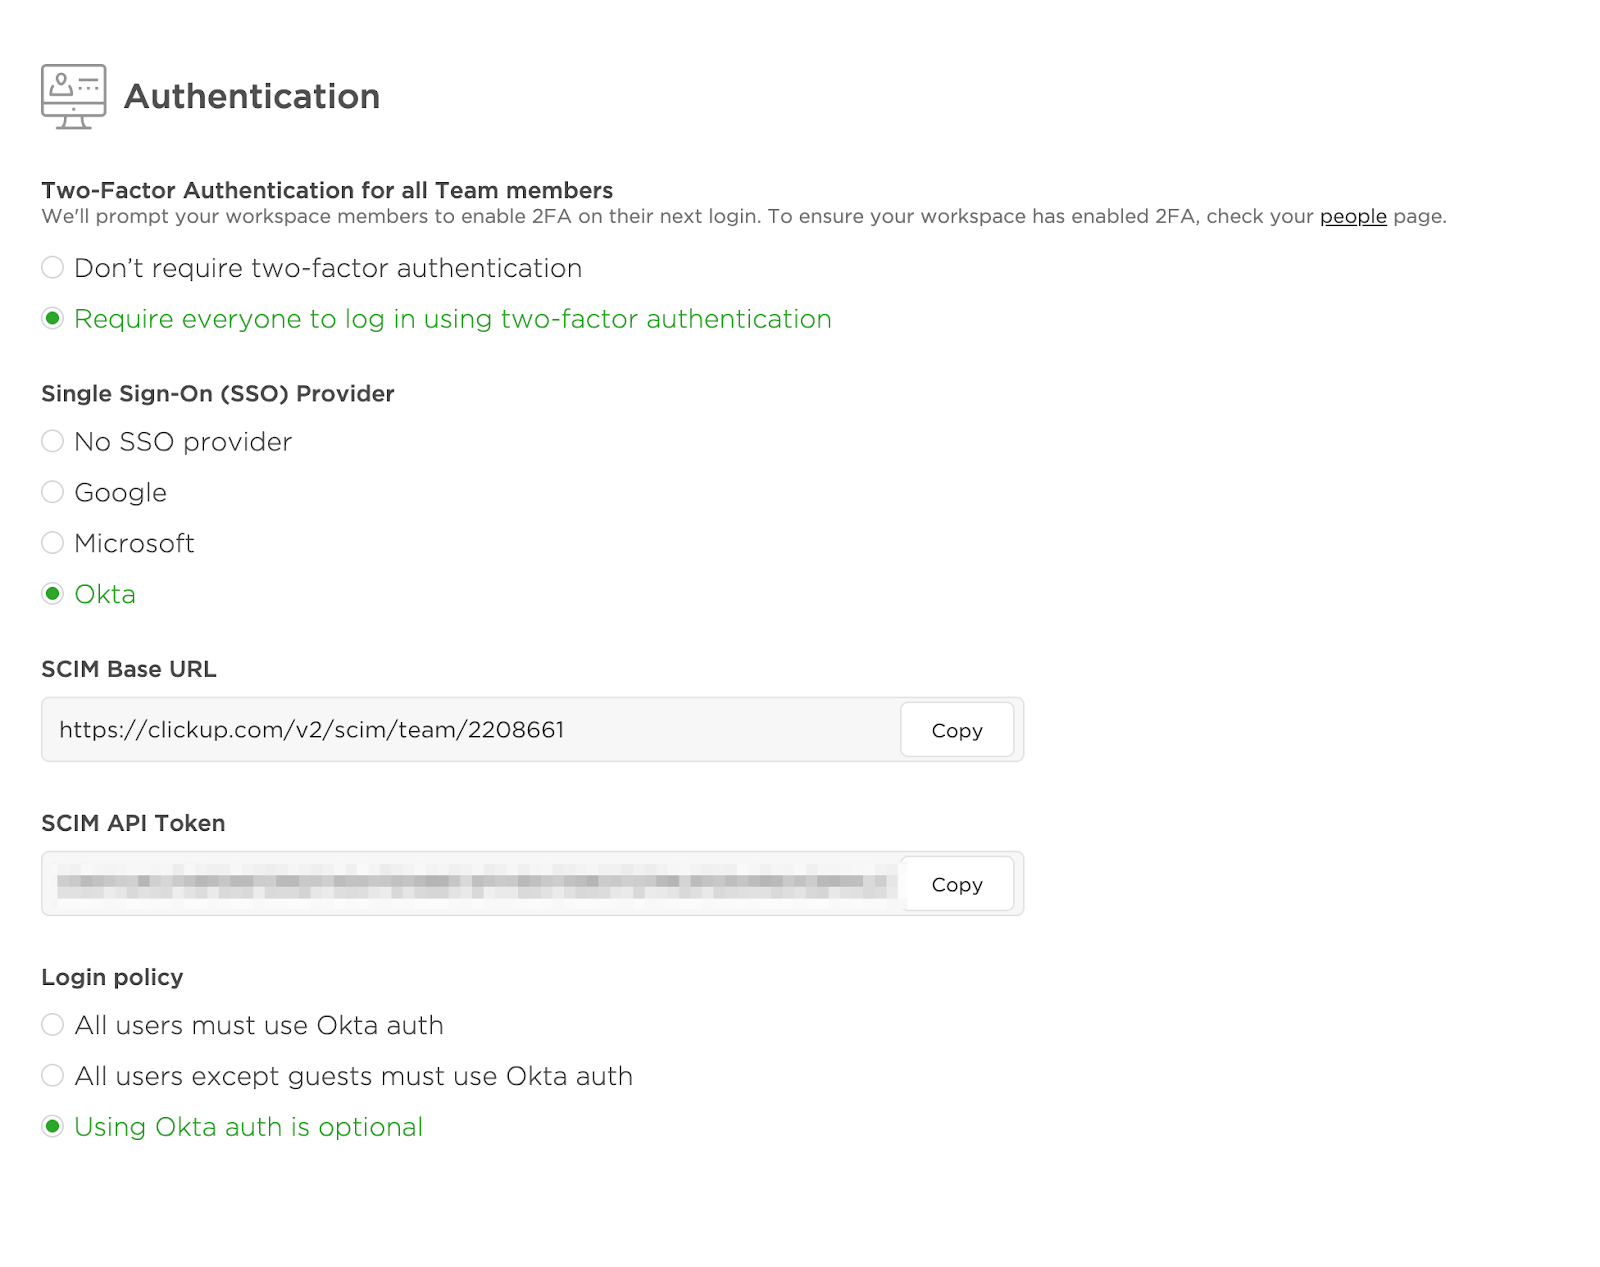 Screenshot of the Okta SSO authentication page.